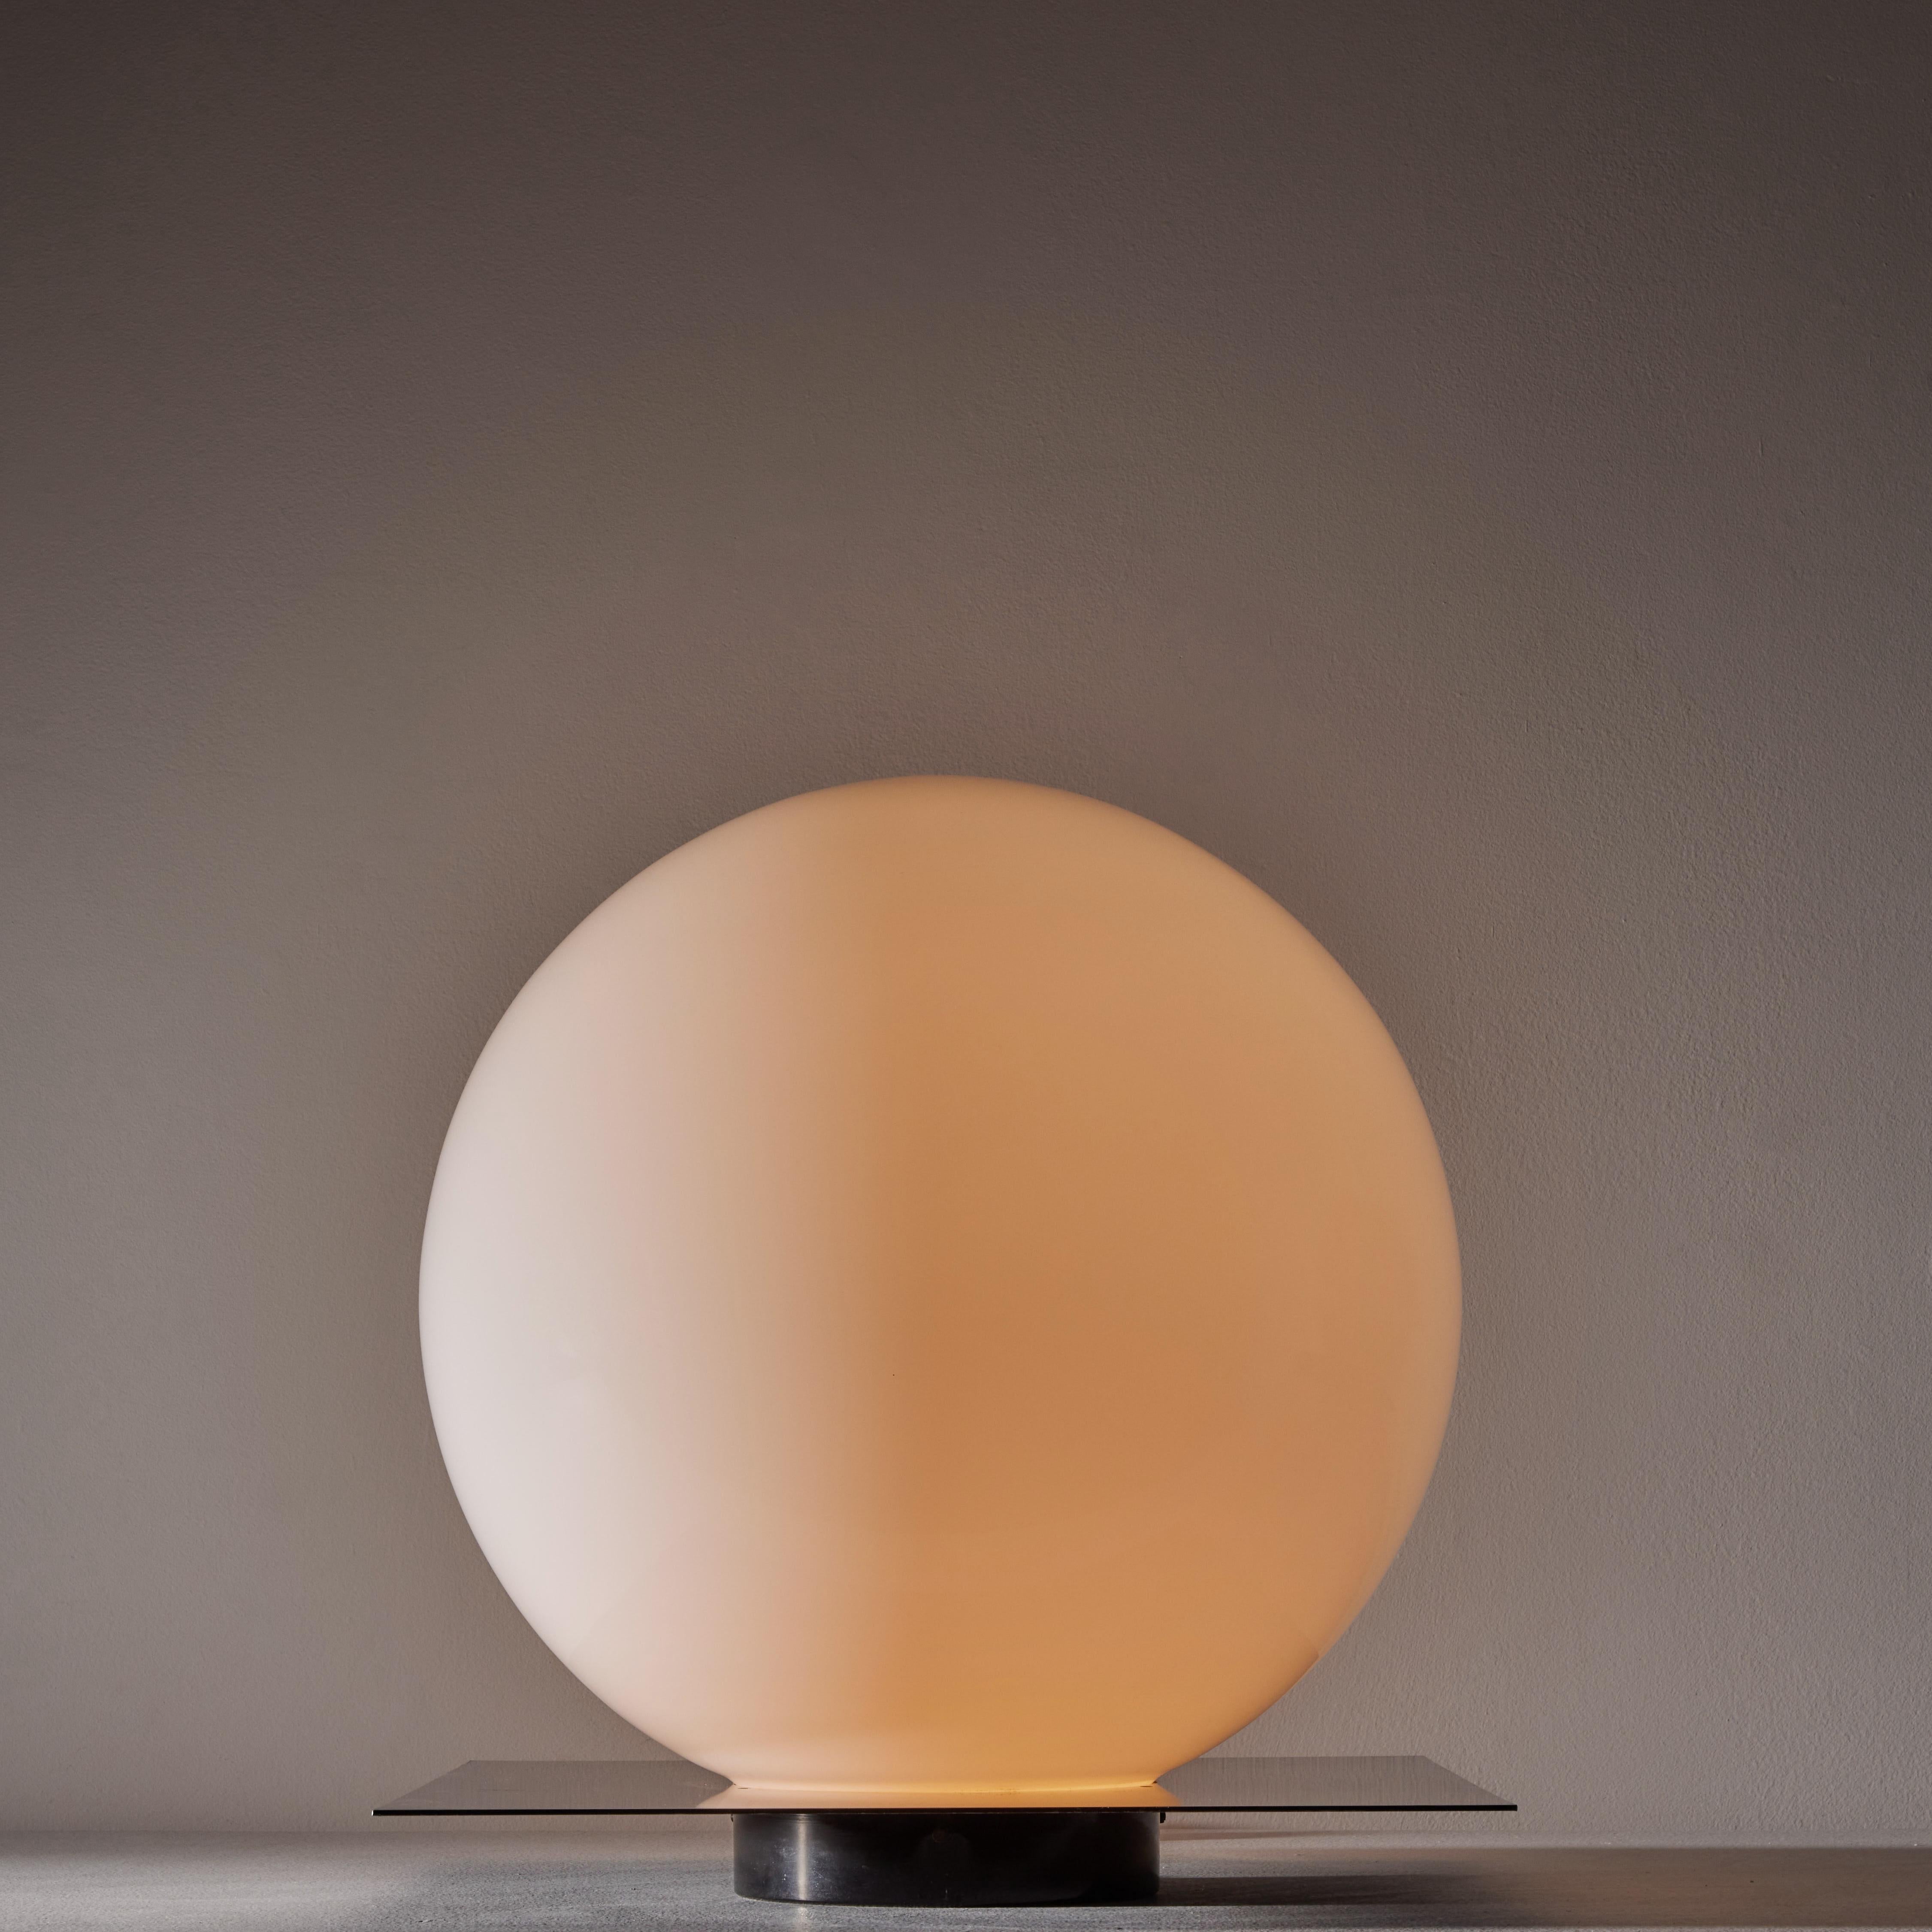 Micol table lamp by Sergio Mazza and Giuliana Gramigna for Quattrifolio. Designed and manufactured in Italy, circa 1970's. Opaline glass diffuser, enameled metal base. Original EU cord. We recommend one E27 100w maximum bulb. Bulbs not included.